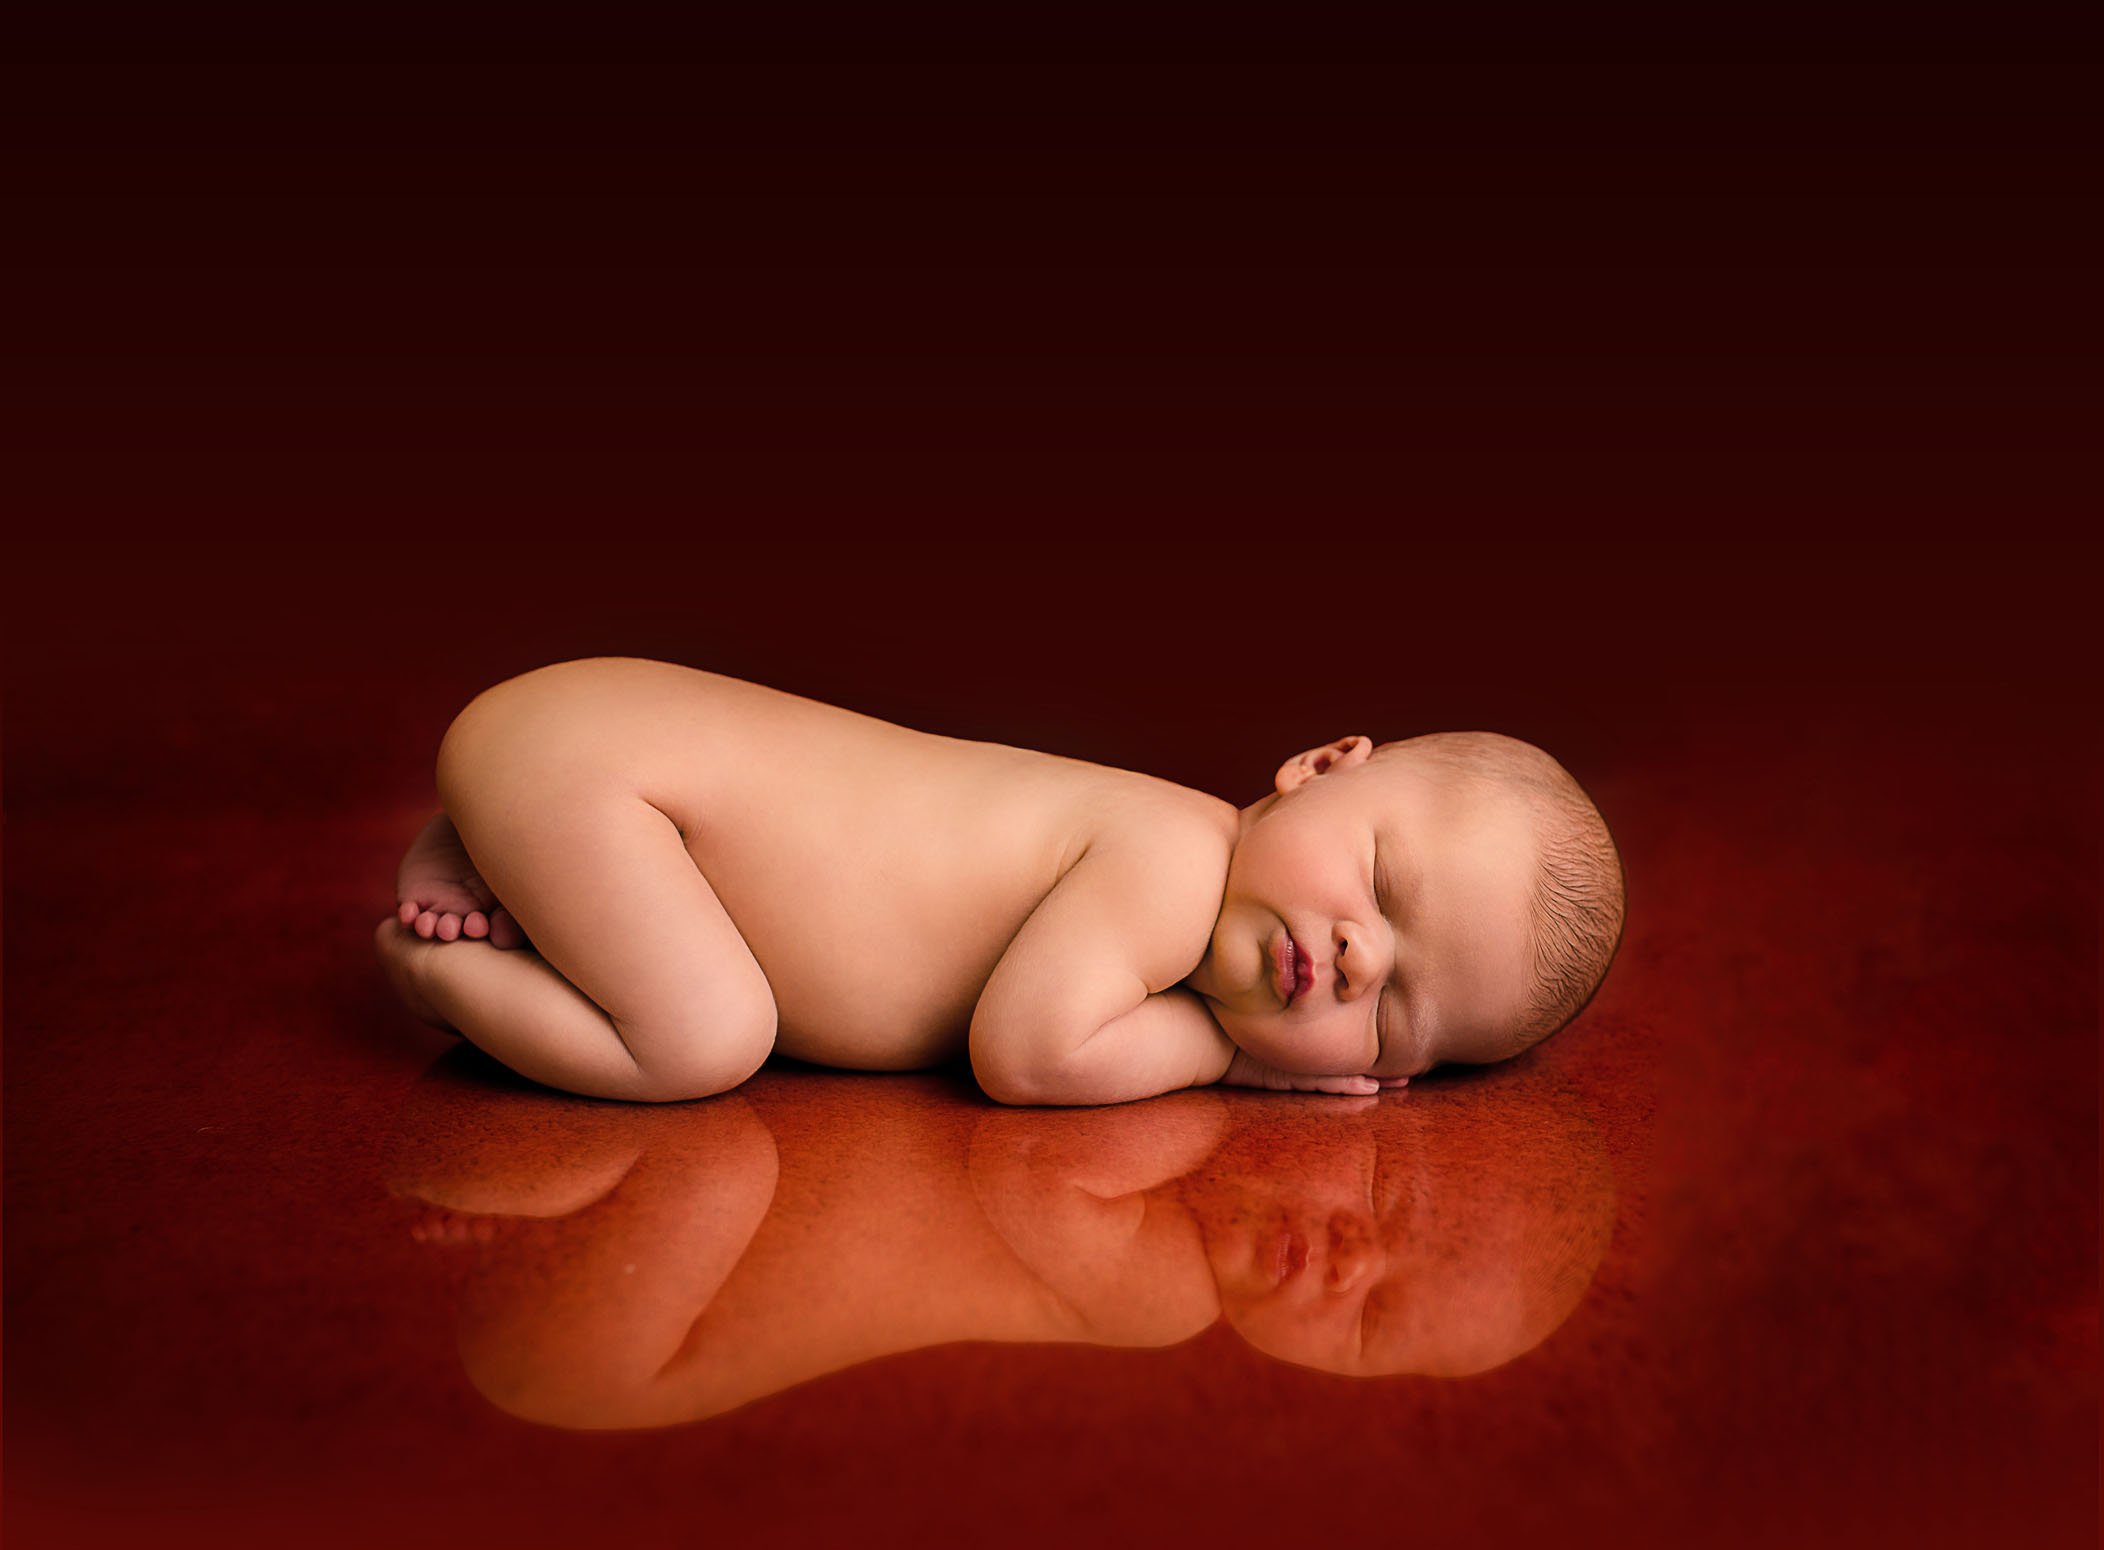 newborn baby on red background with reflection under her